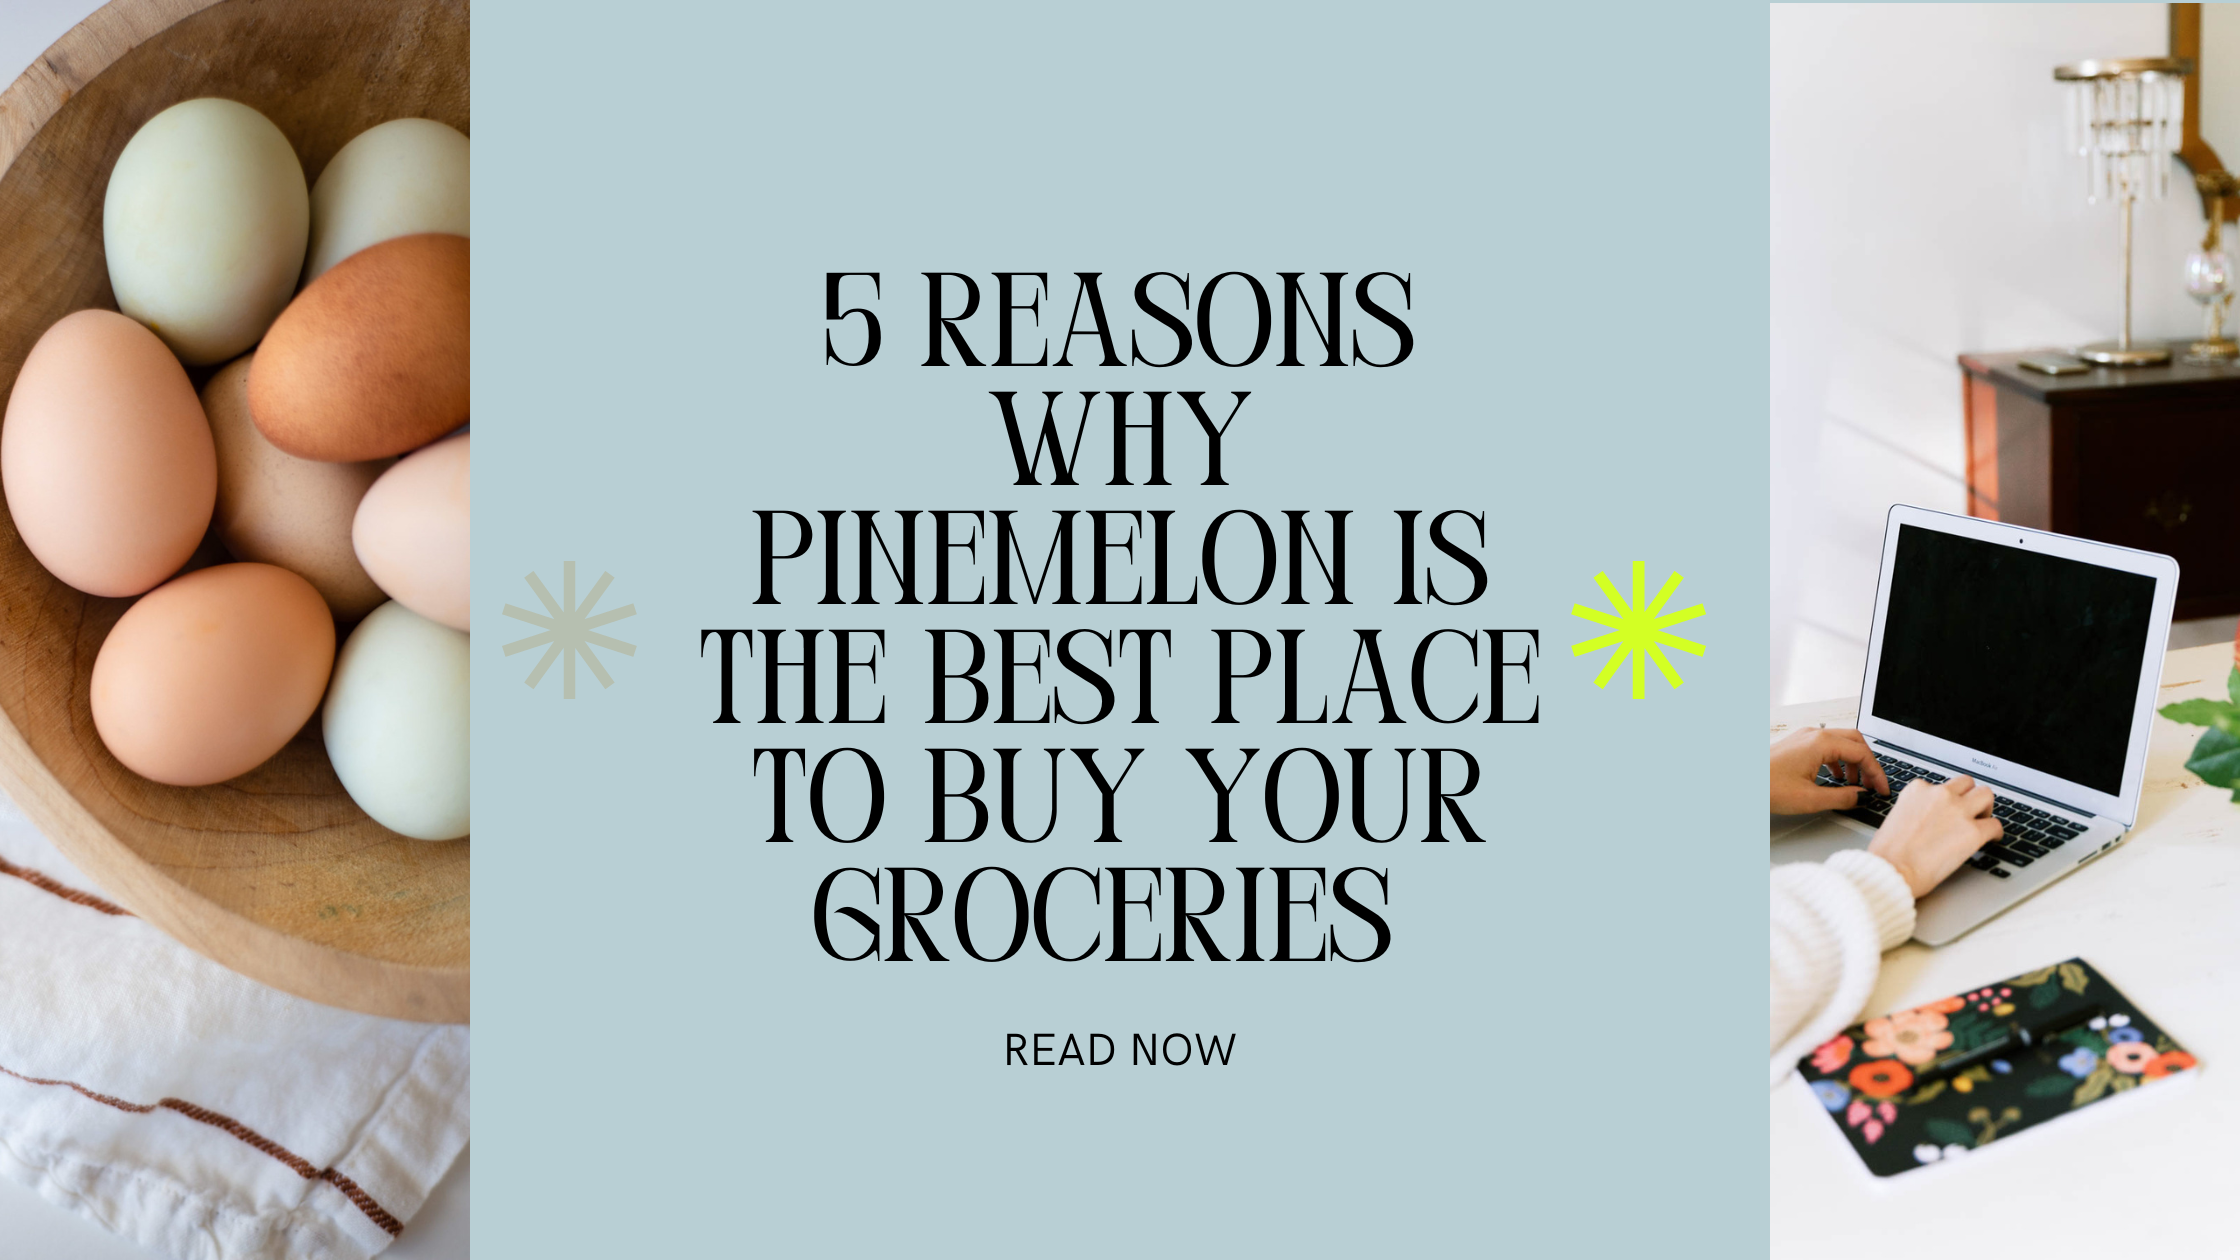 five reasons why pinemelon is the best place to buy groceries